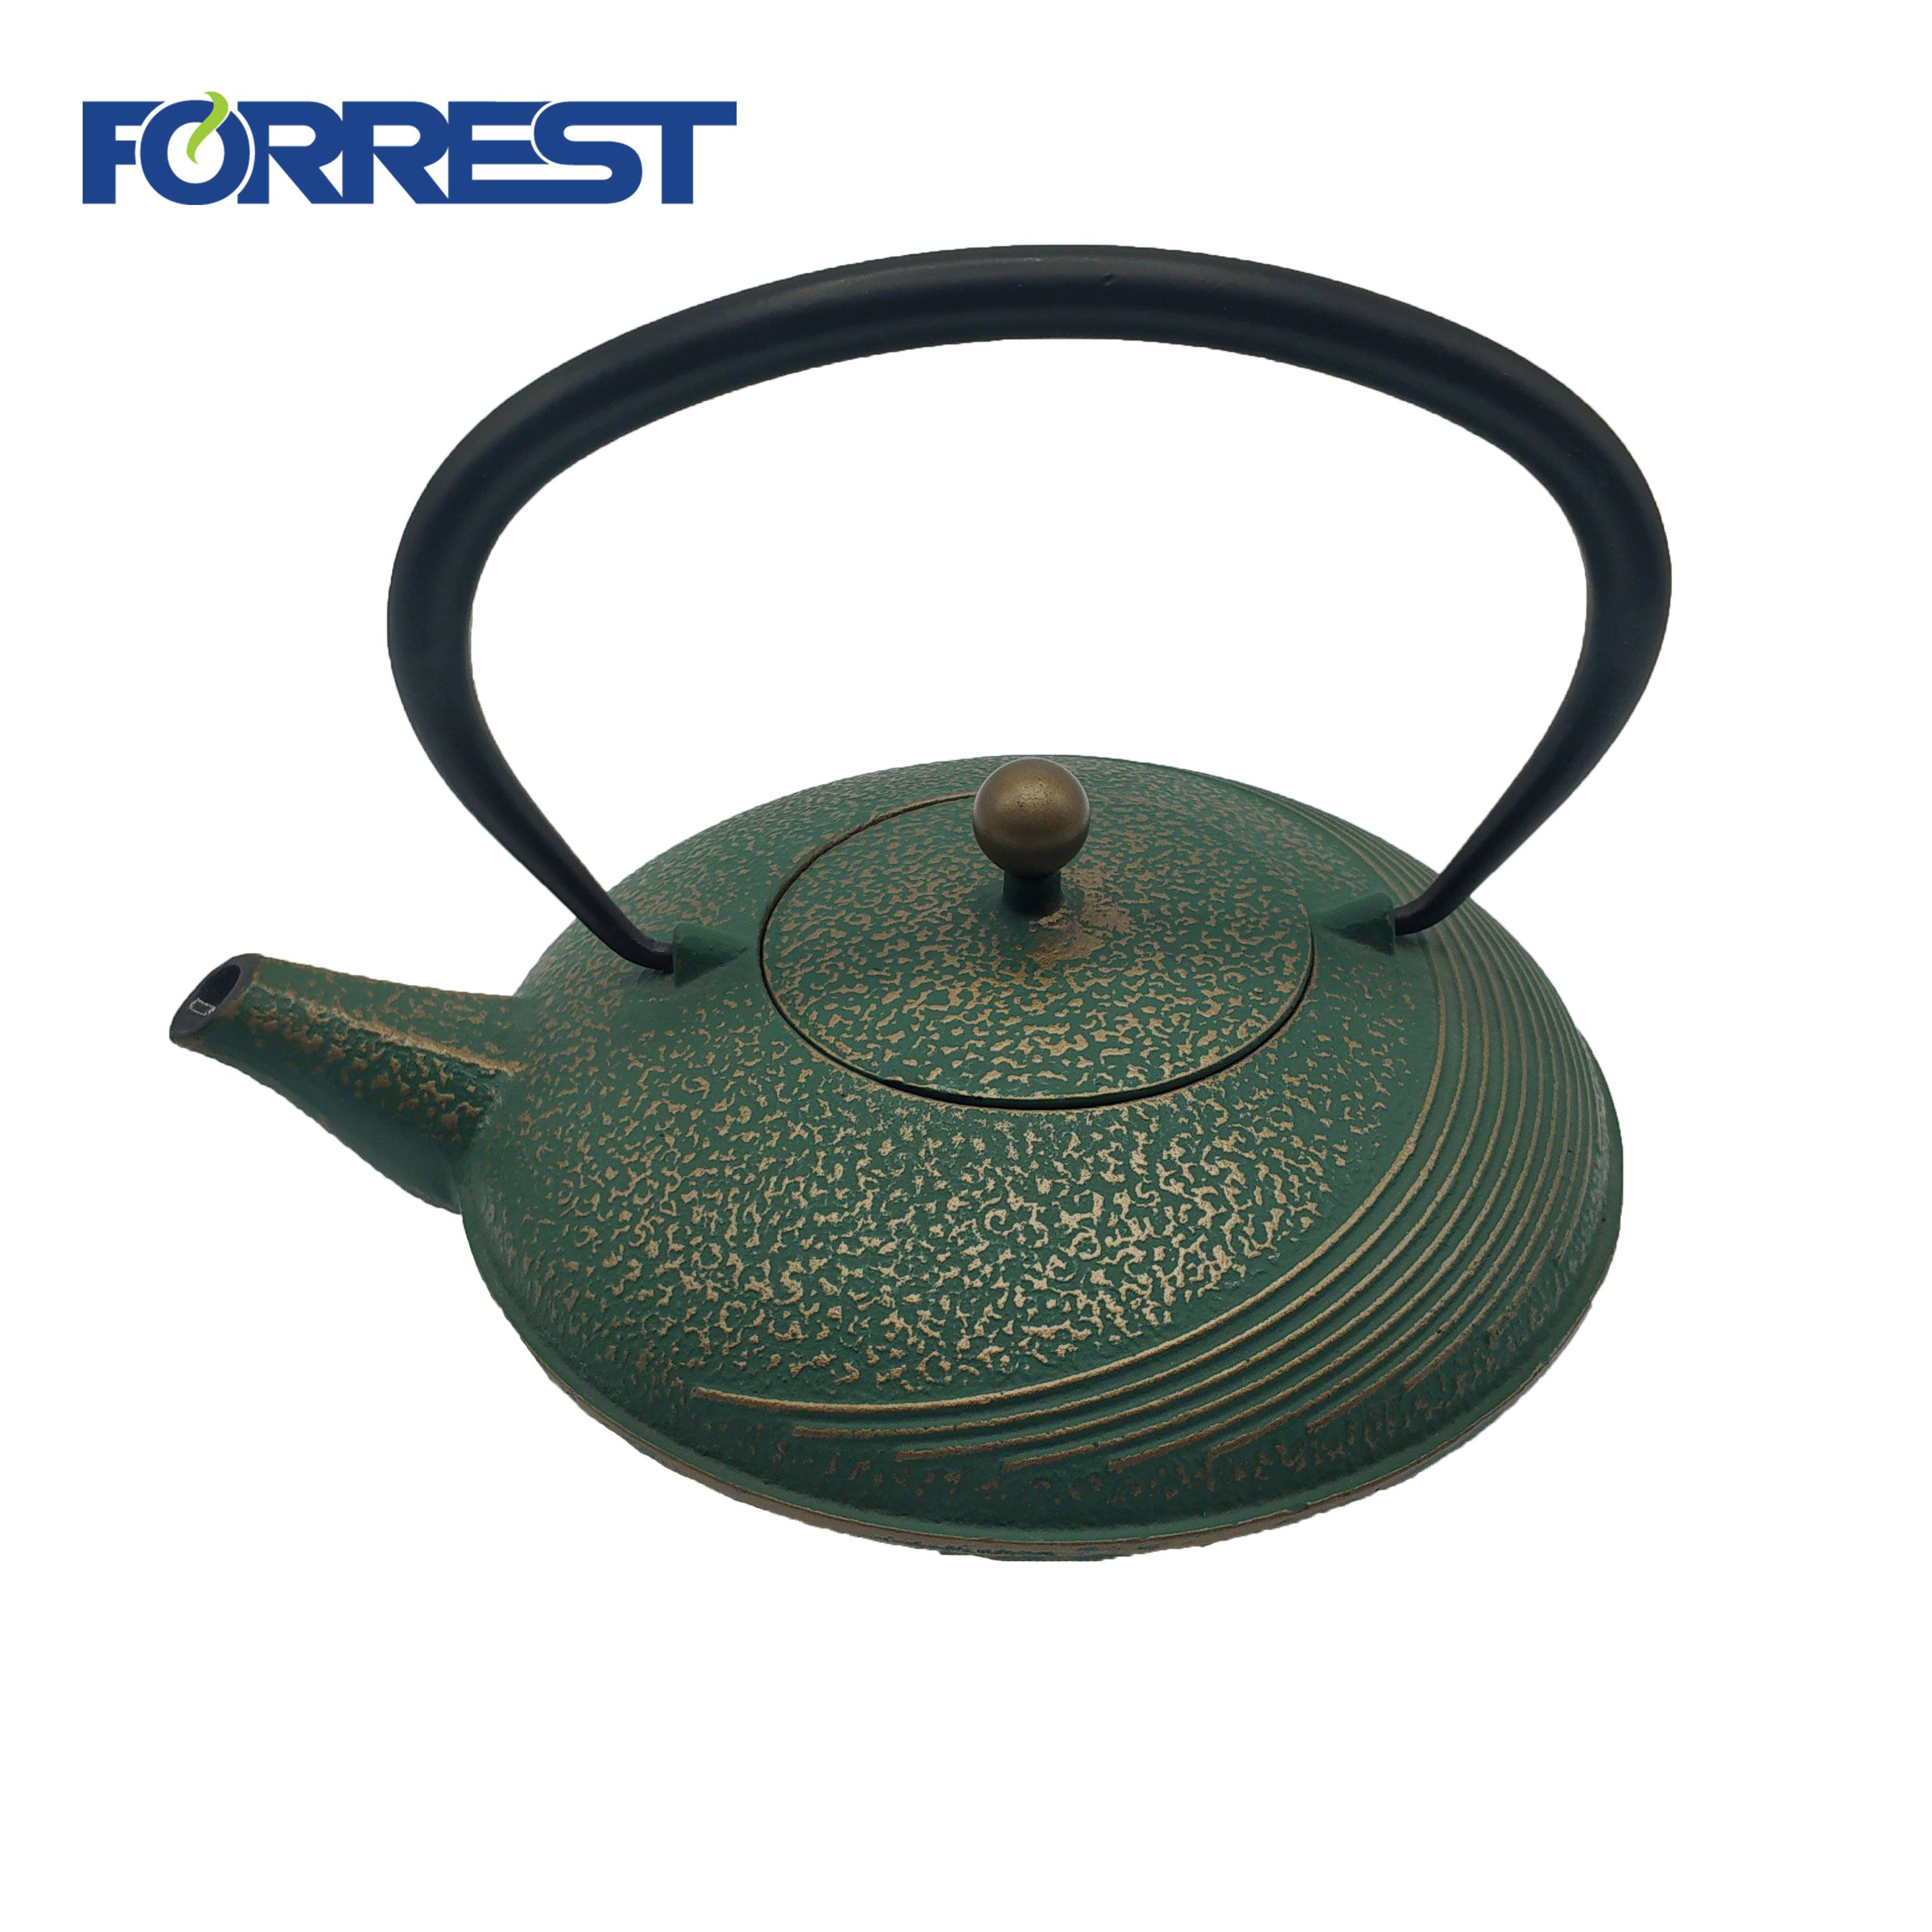 Round cast iron teapot with stainless infuse